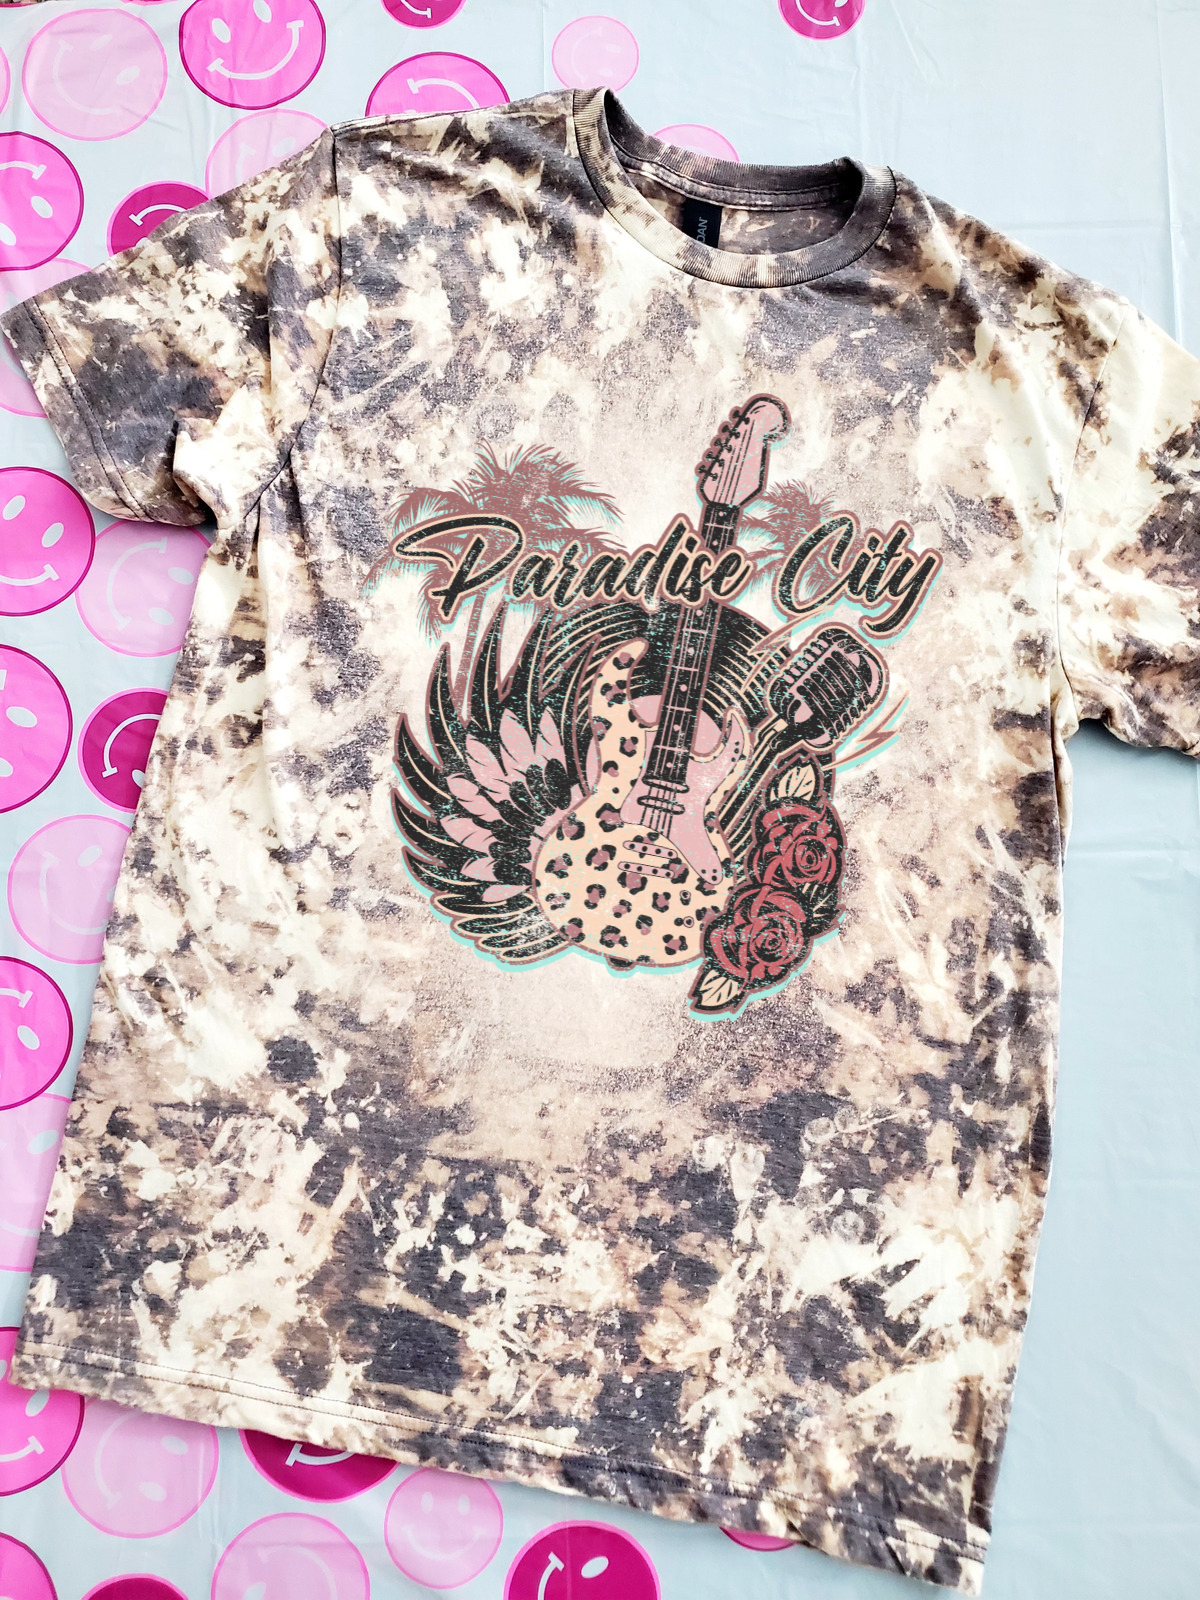 Paradise City Bleached tee